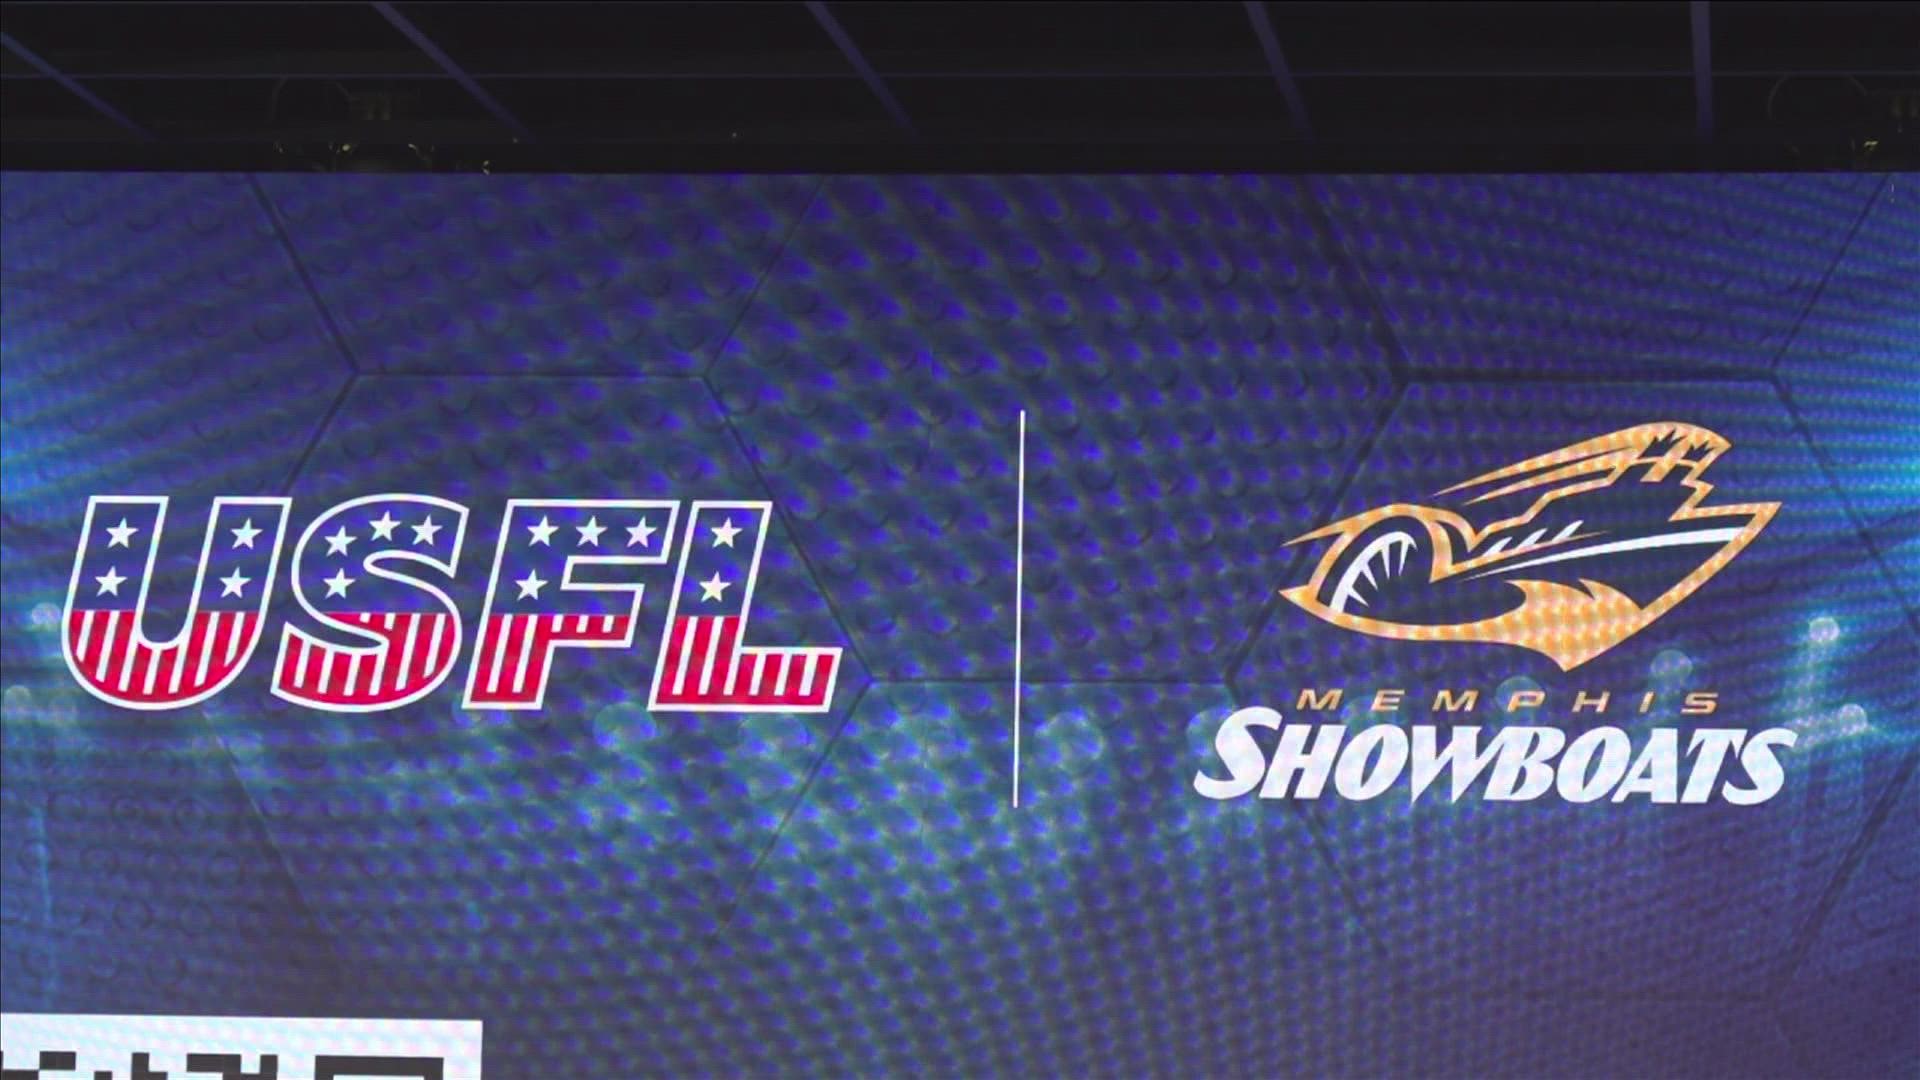 The Memphis Showboats will play at Simmons Bank Liberty Stadium with the first game set for April 16, 2023.